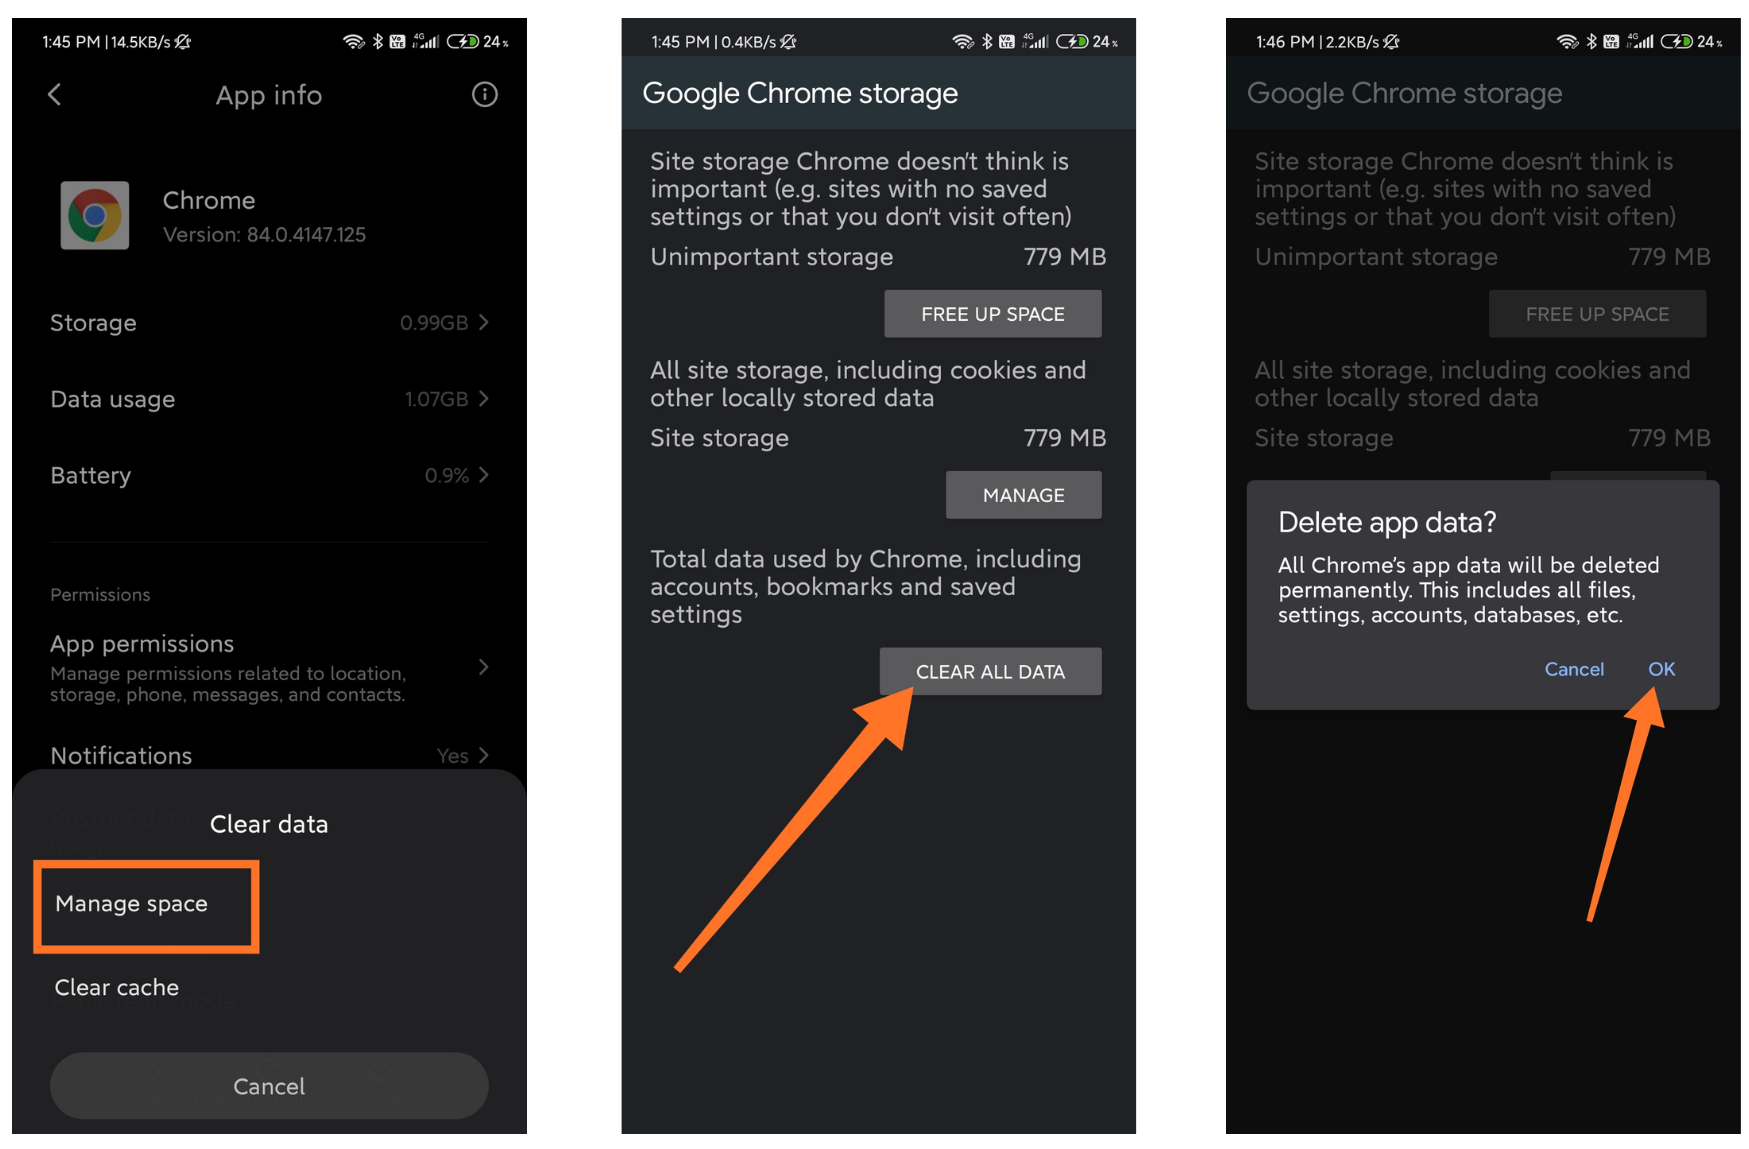 How to Reset Google Chrome on Android Smartphones